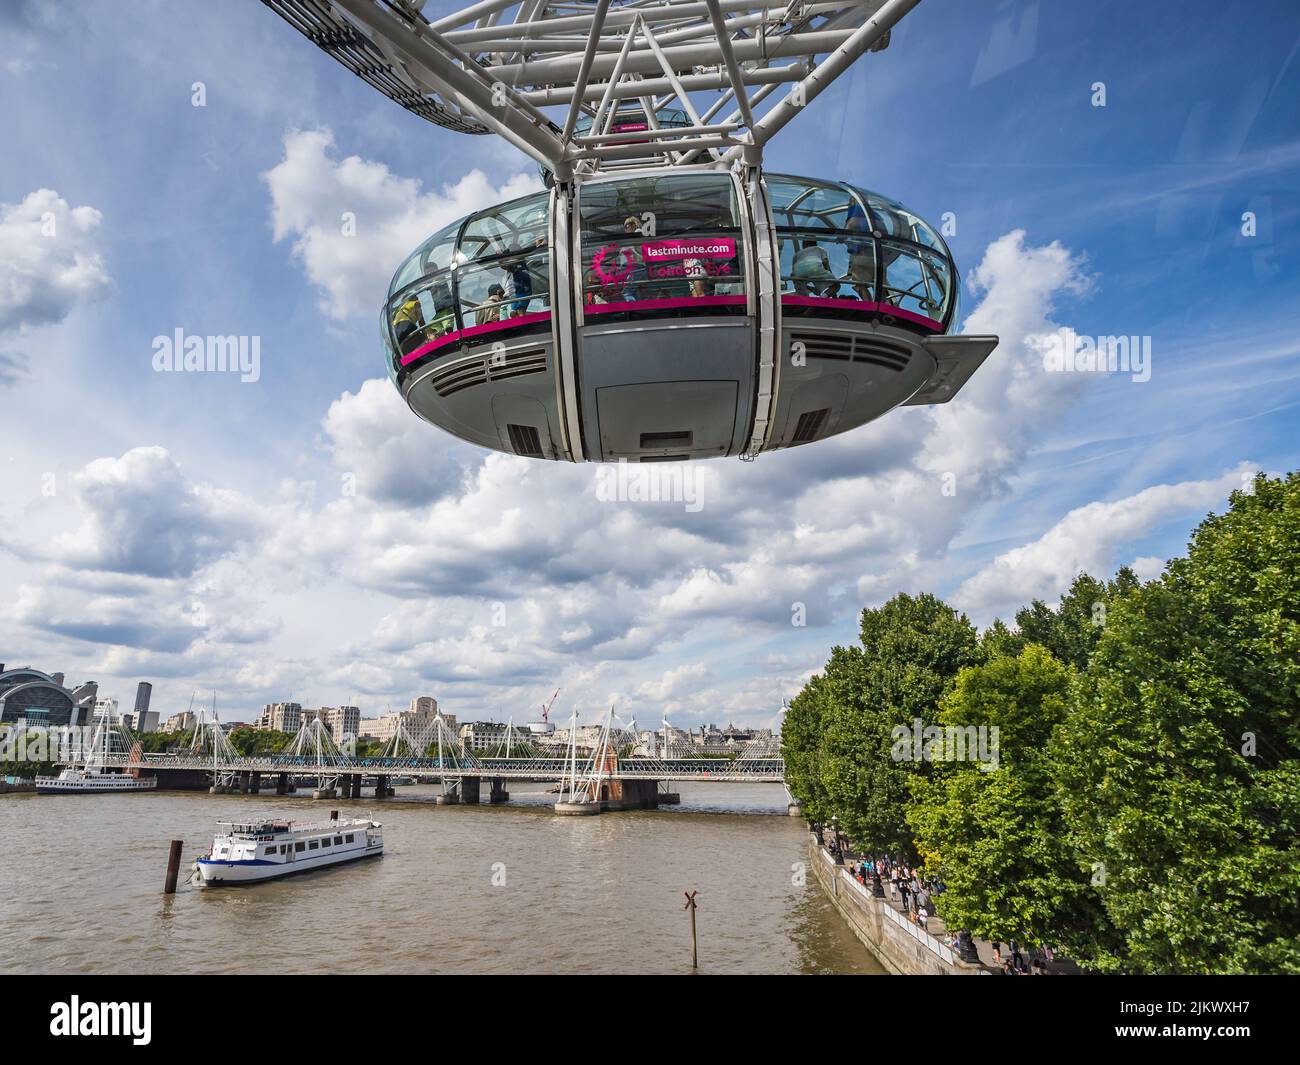 Looking under a capsule on the London Eye as it begins to rotate over London giving tourists a unique experience above the River Thames, seen in Augus Stock Photo